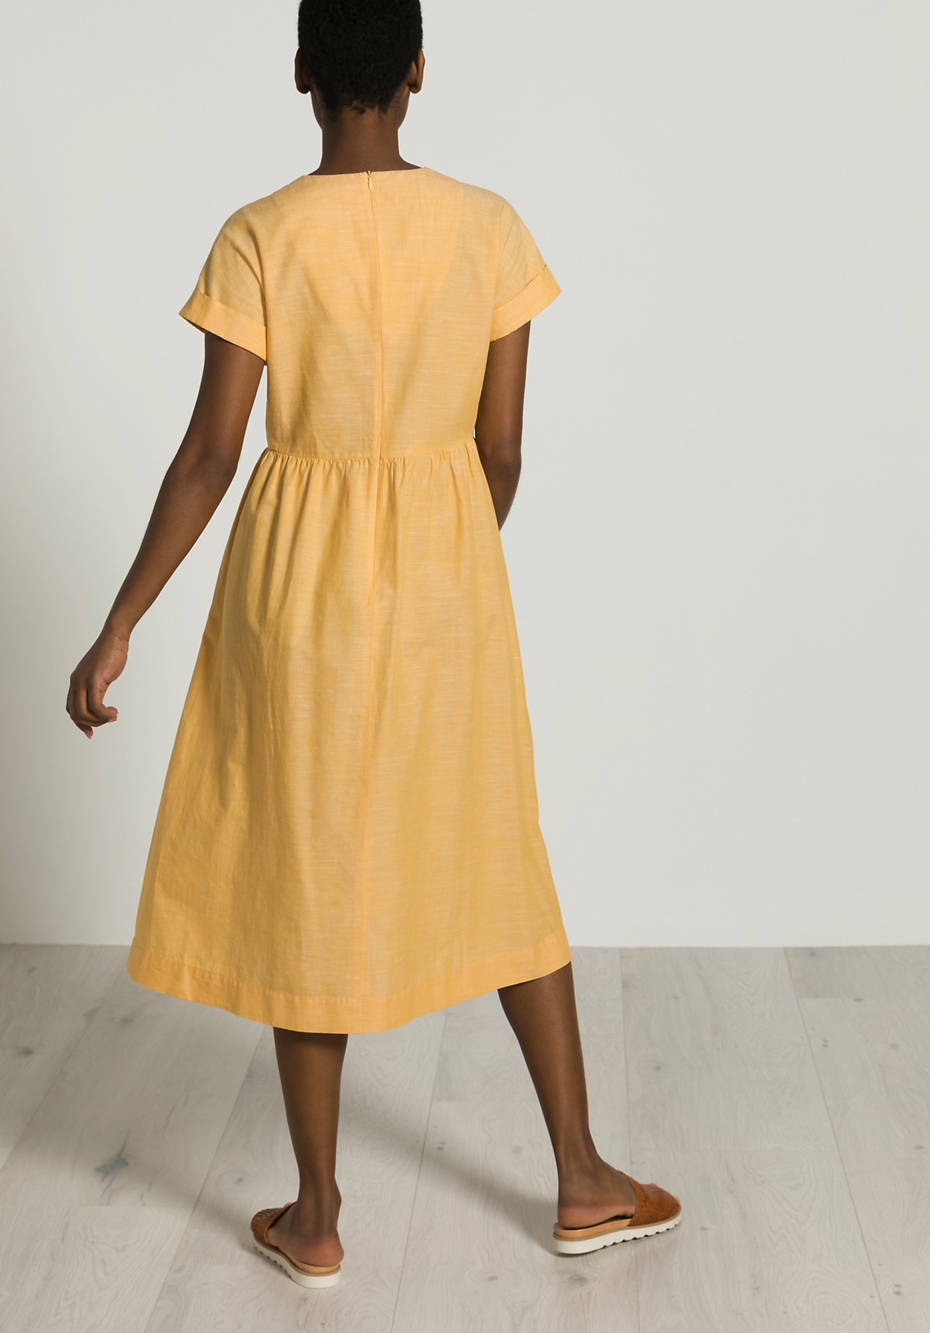 Dress made of organic cotton with linen